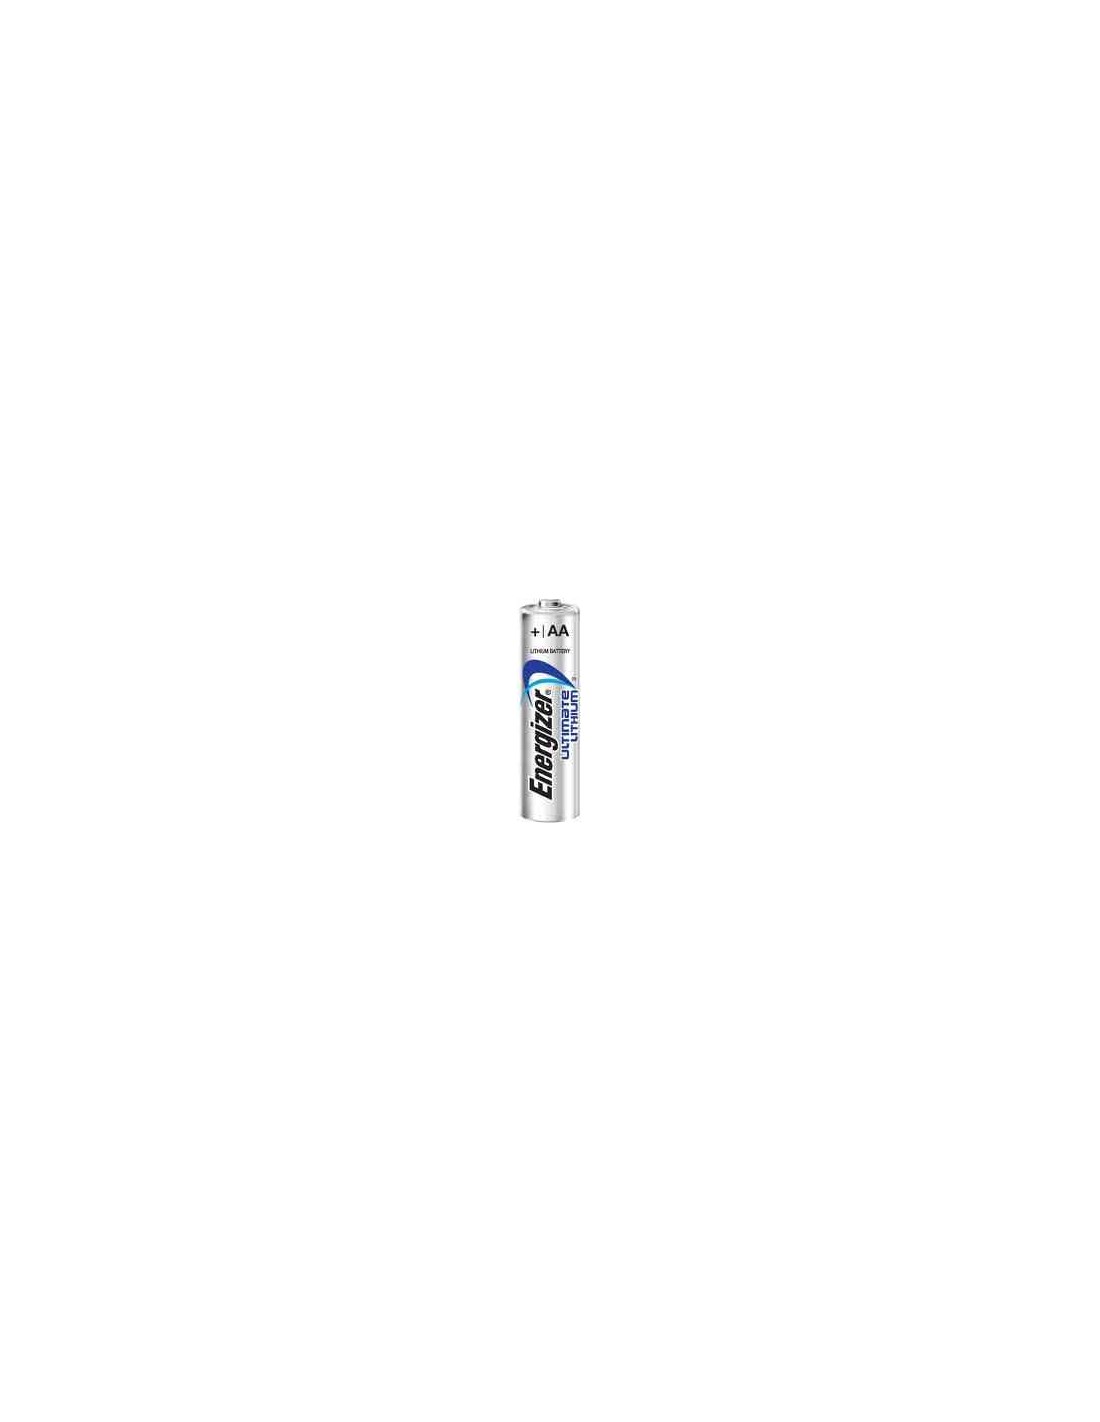 Energizer Ultimate Lithium AA 36 Batteries L91